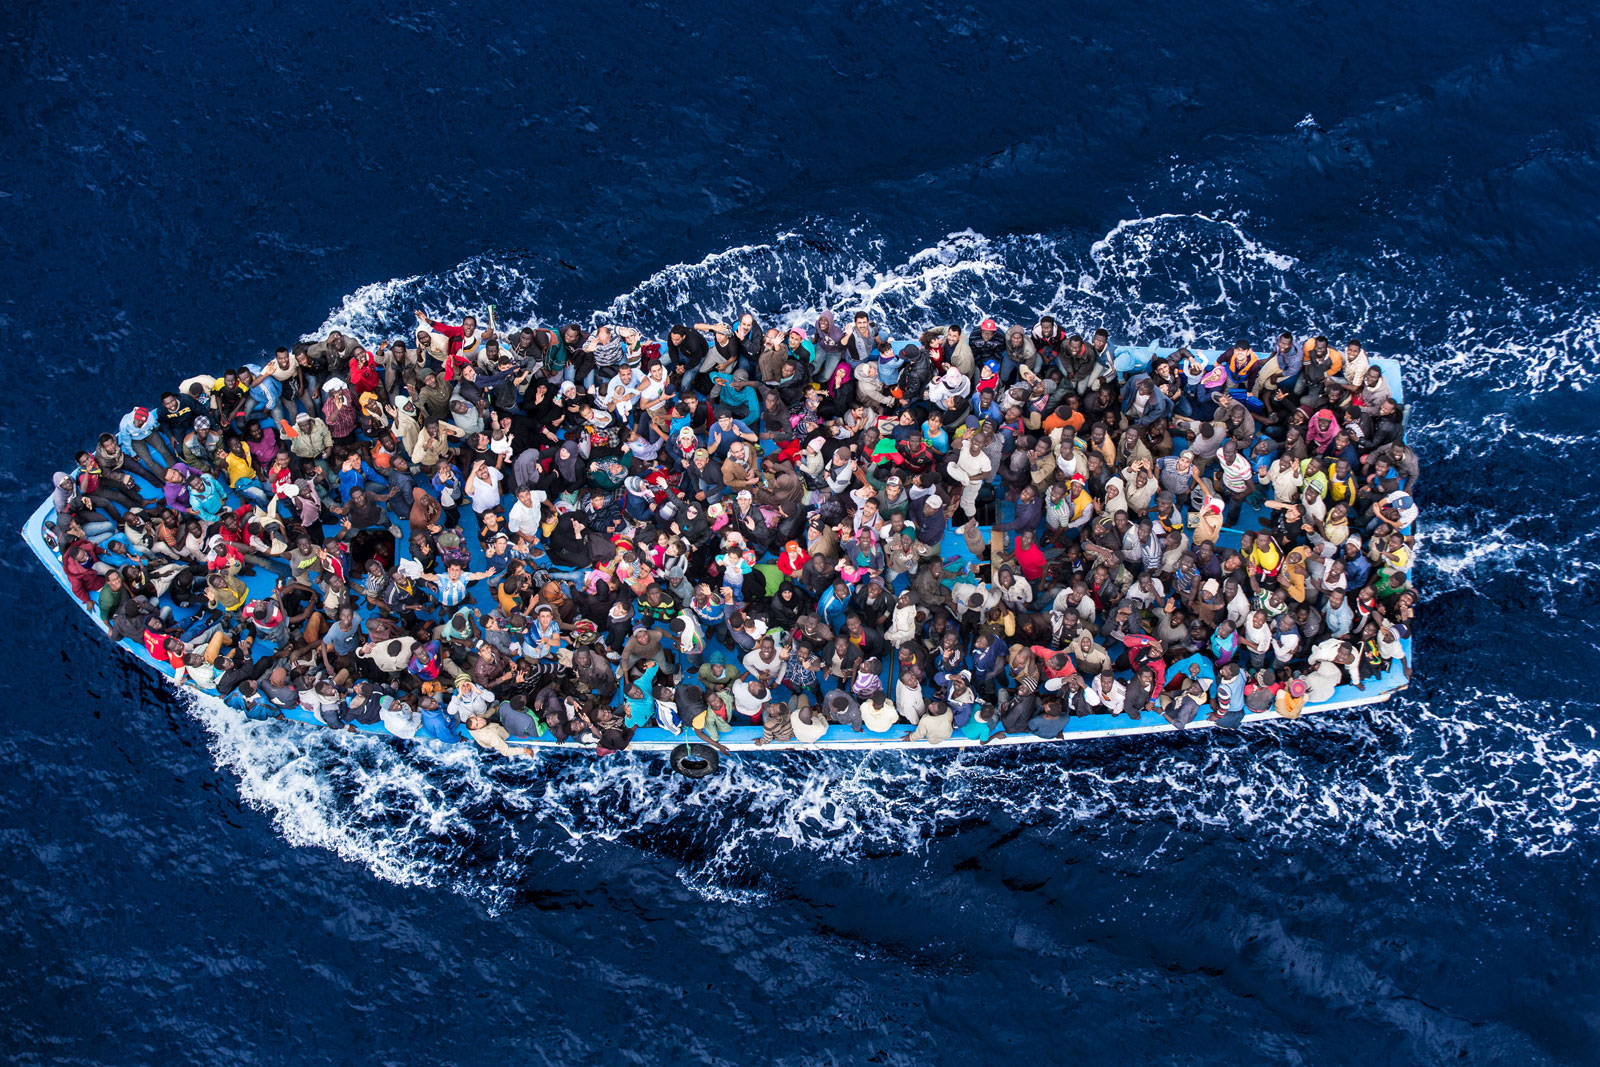 &#8216;Bright Unbearable Reality&#8217;: Migration As Seen from Above